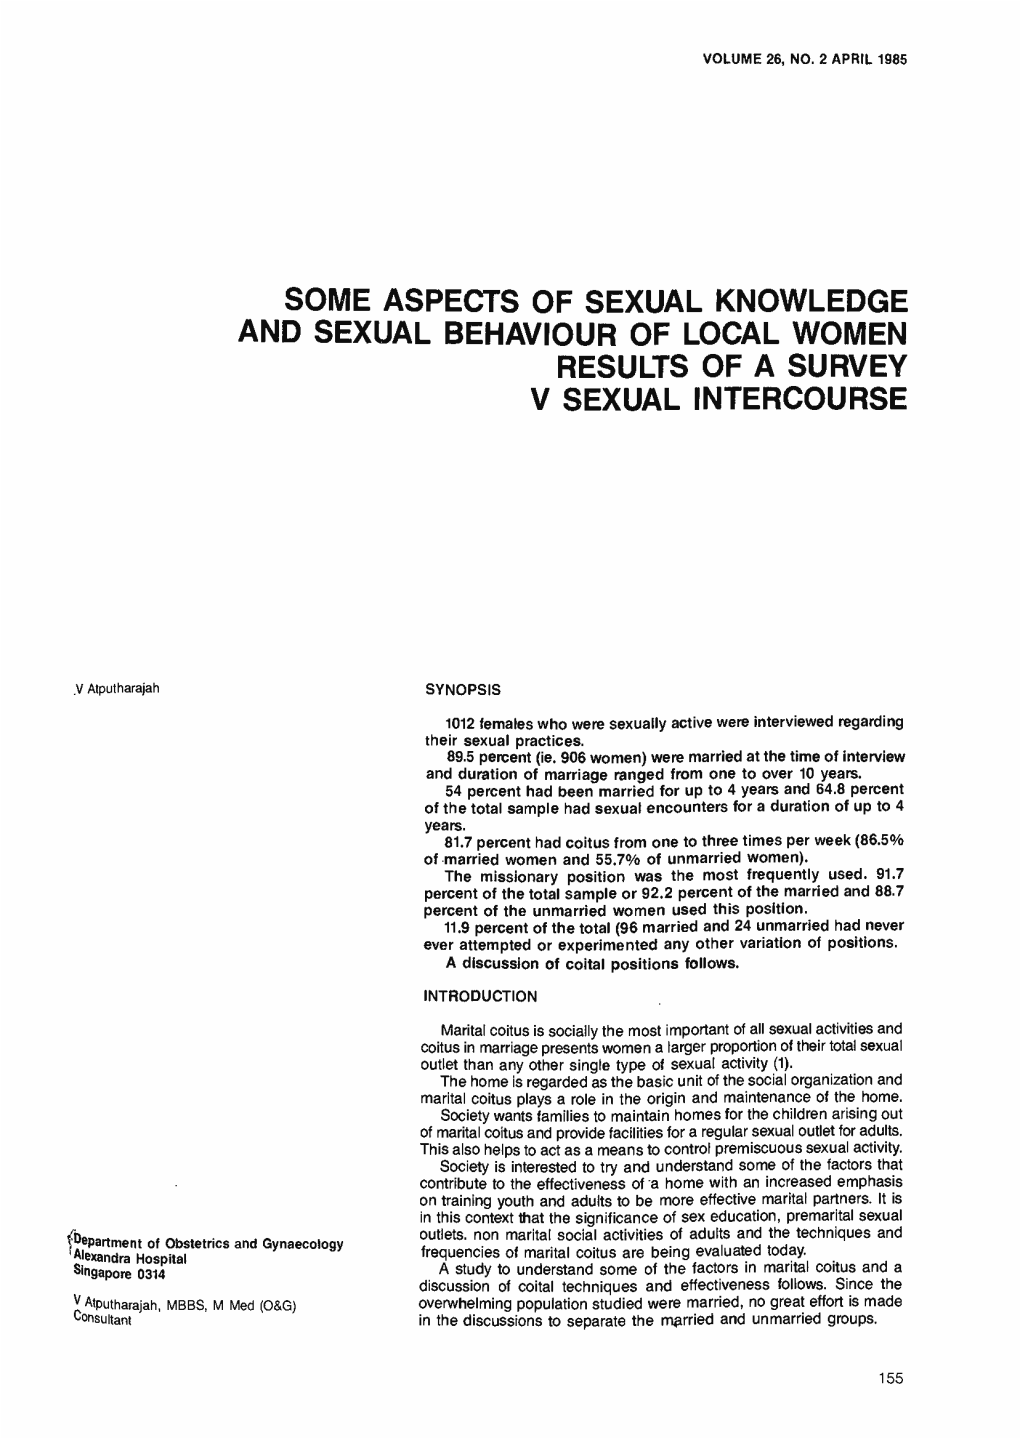 Some Aspects of Sexual Knowledge and Sexual Behaviour of Local Women Results of a Survey V Sexual Intercourse